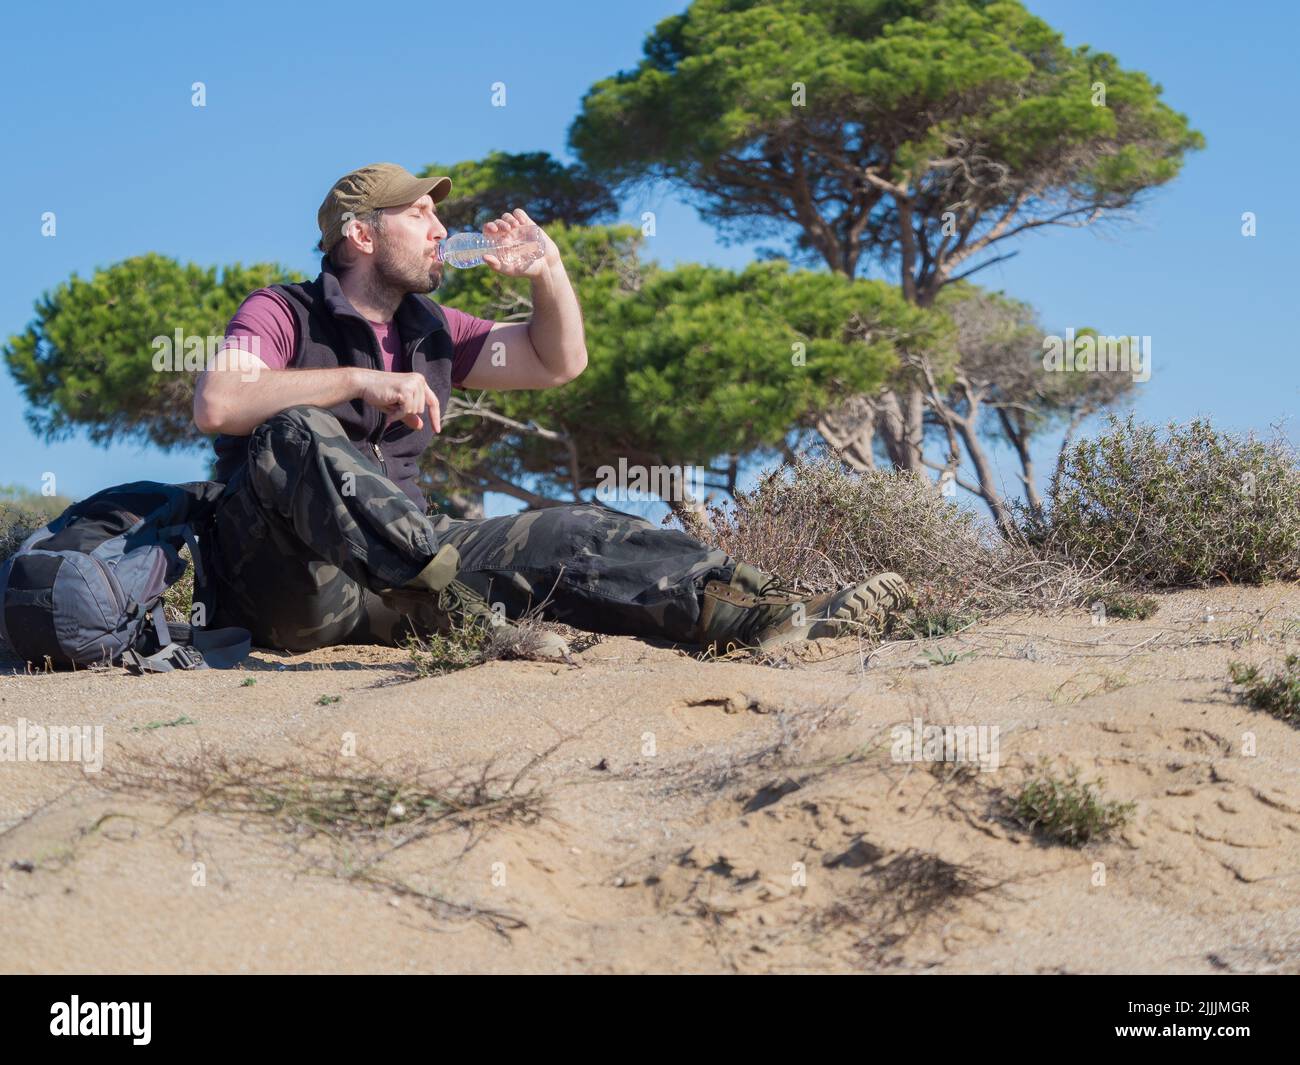 Tourist man drinking water from the plastic bottle during break in a desert walk. Travel concept. Stock Photo